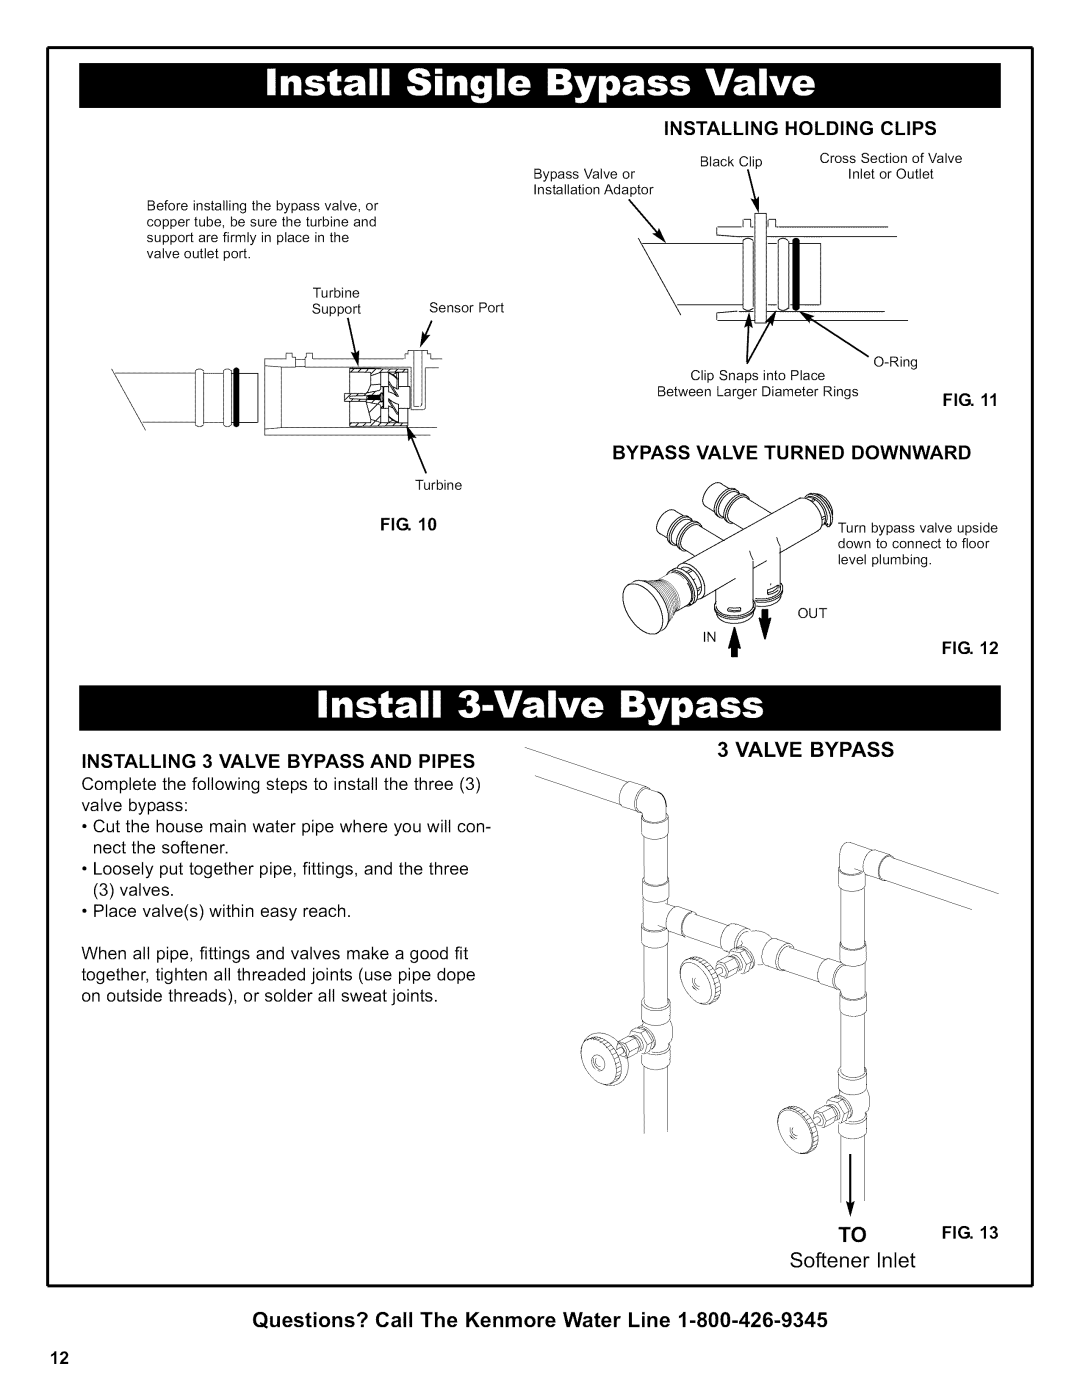 Kenmore 625.38376 owner manual Valve Bypass, Questions? Call The Kenmore Water Line, Installing, Holding, Clips 